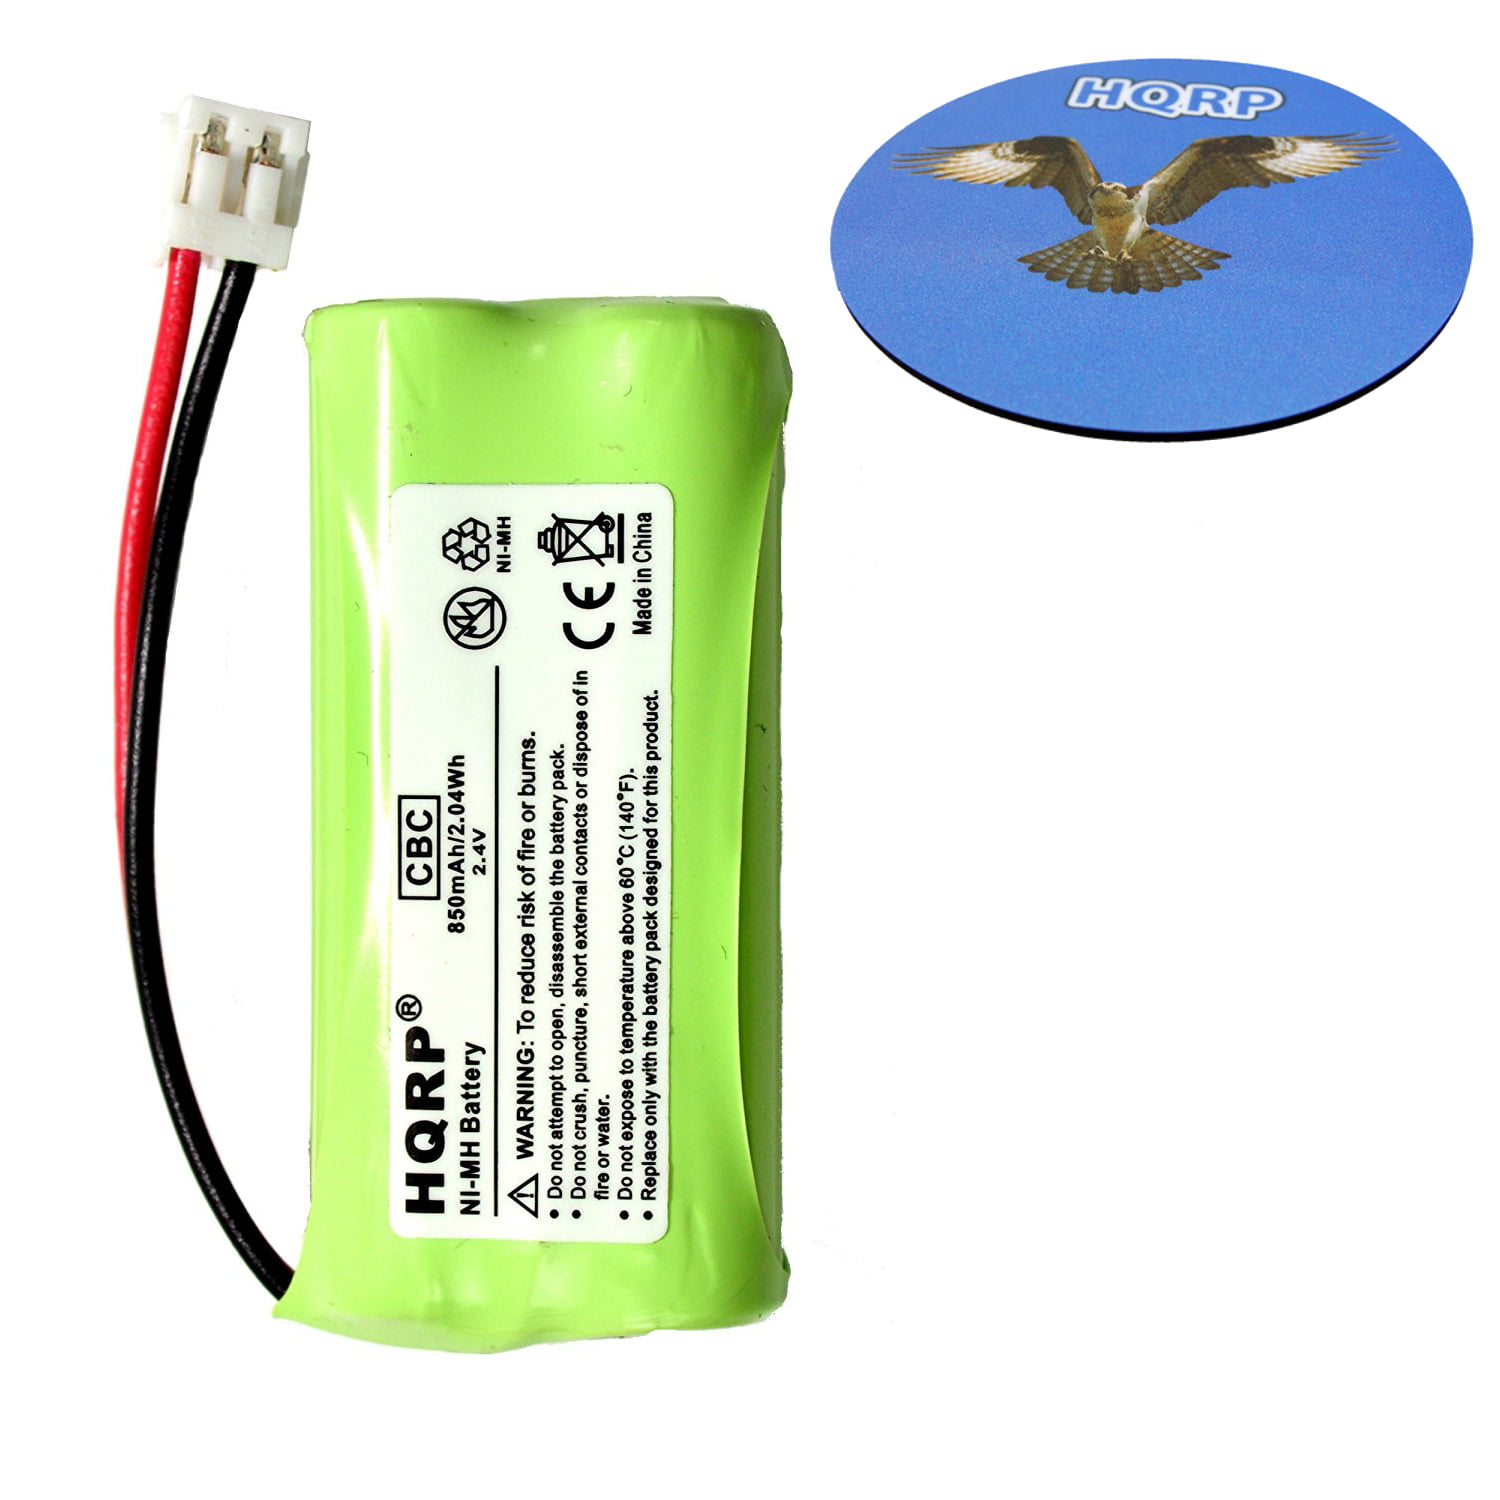 HQRP Cordless Telephone / Phone Battery for AT&T LUCENT BT184342